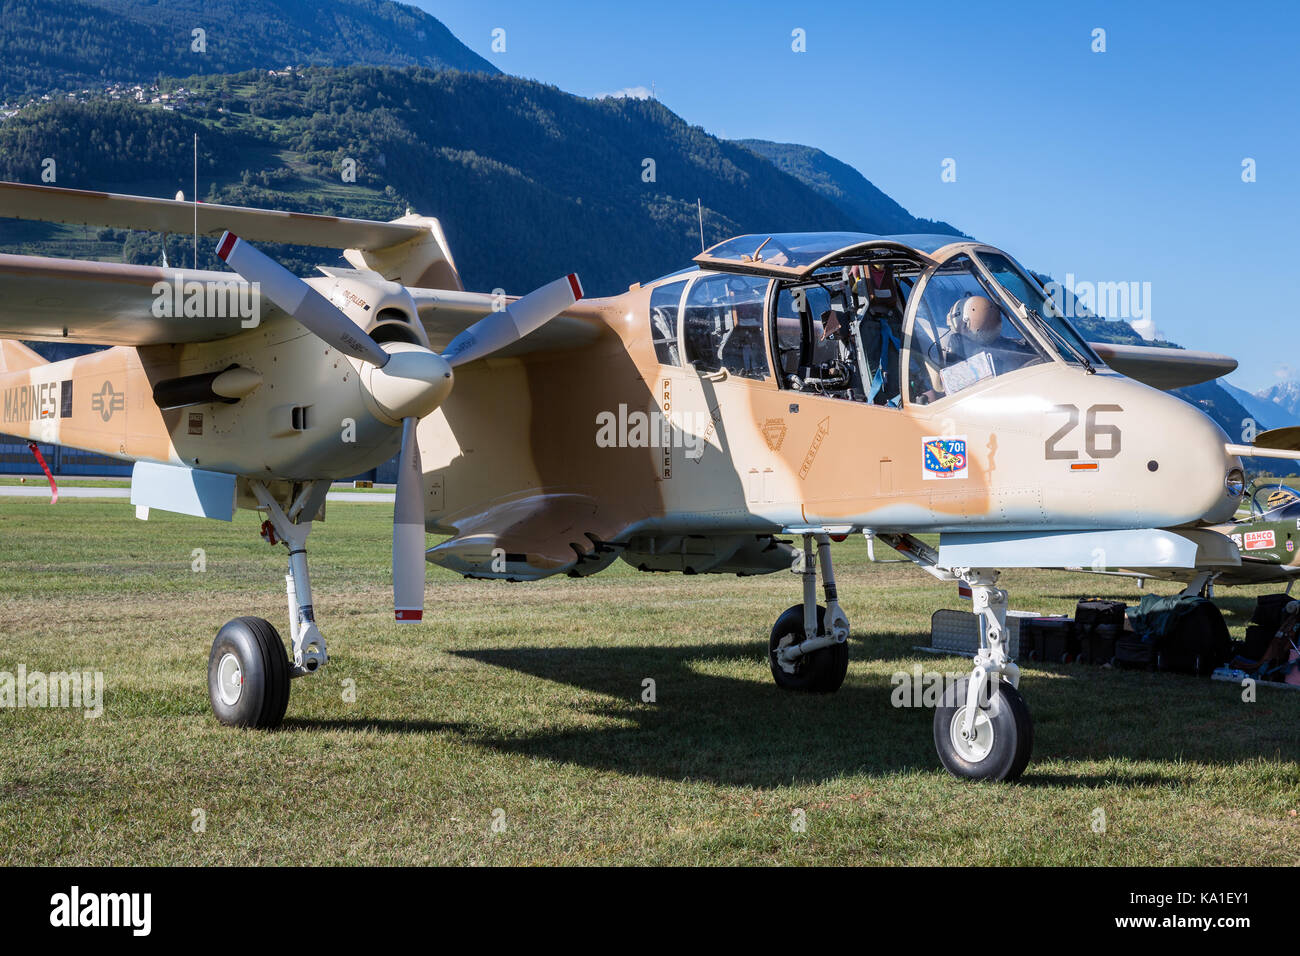 North American Rockwell OV-10 Bronco, US Marines, Sion Airshow, Sion, Valais, Switzerland Stock Photo